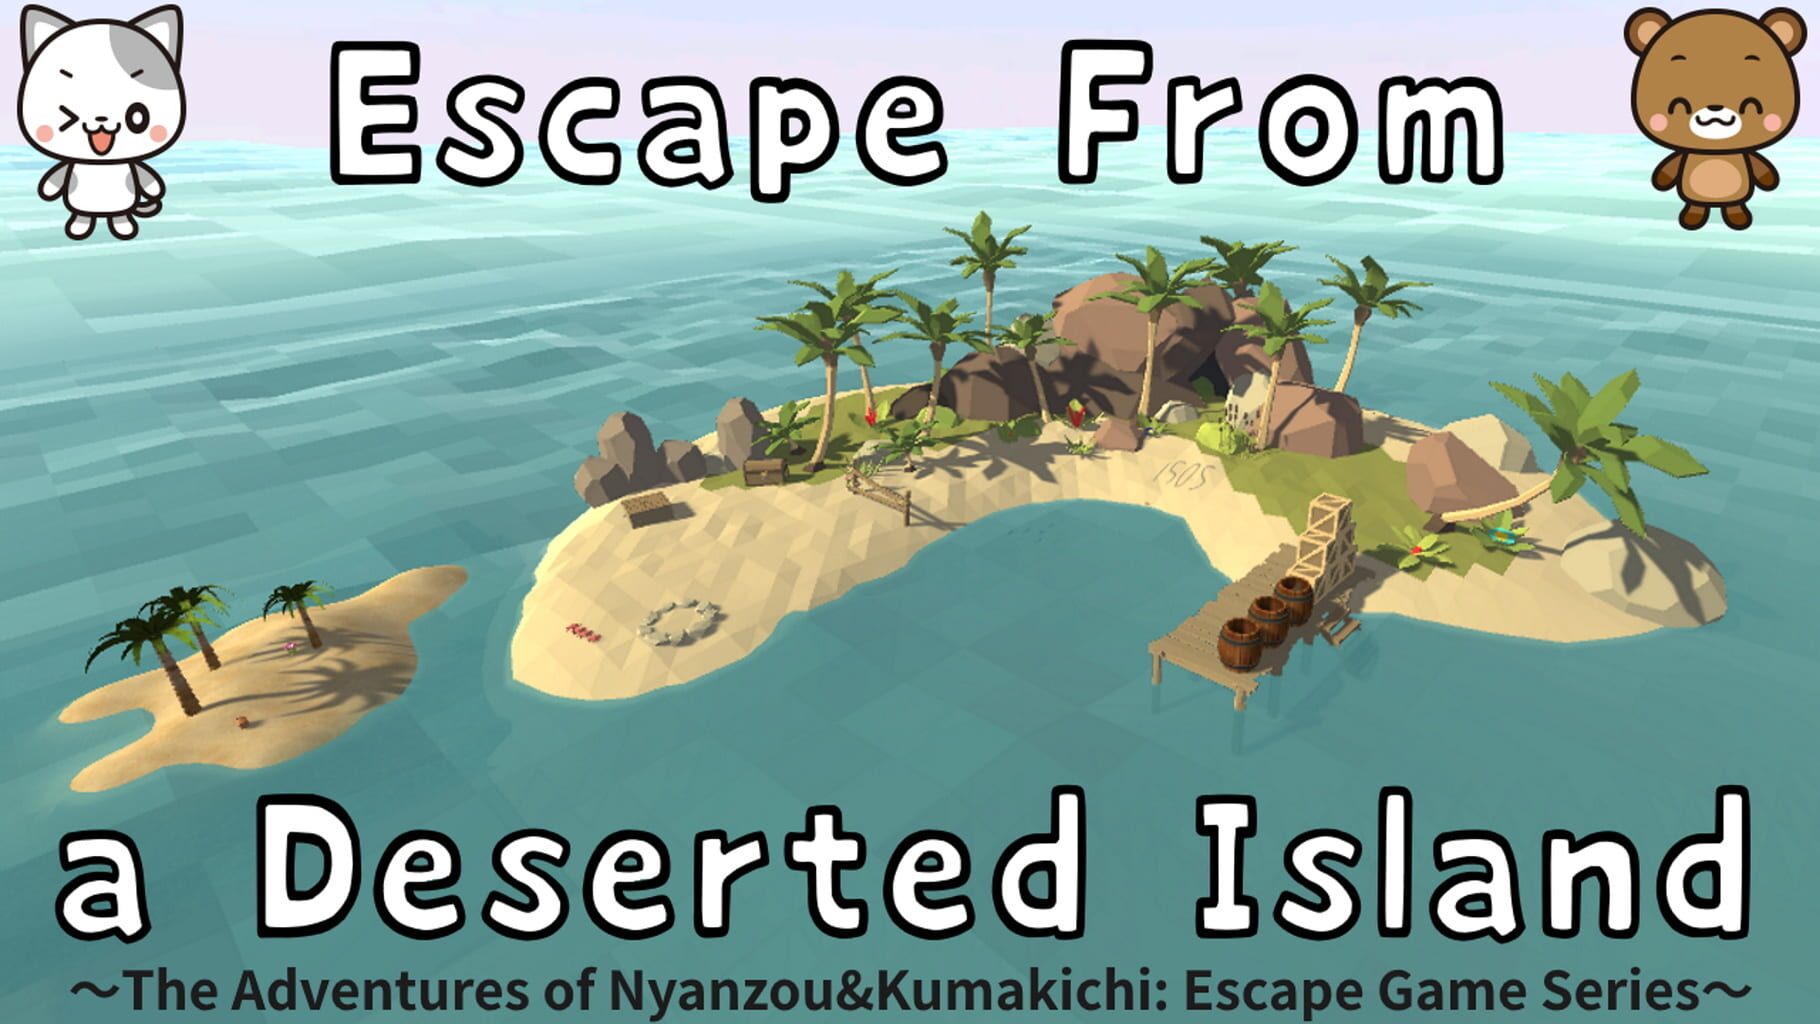 Escape From a Deserted Island: The Adventures of Nyanzou & Kumakichi artwork